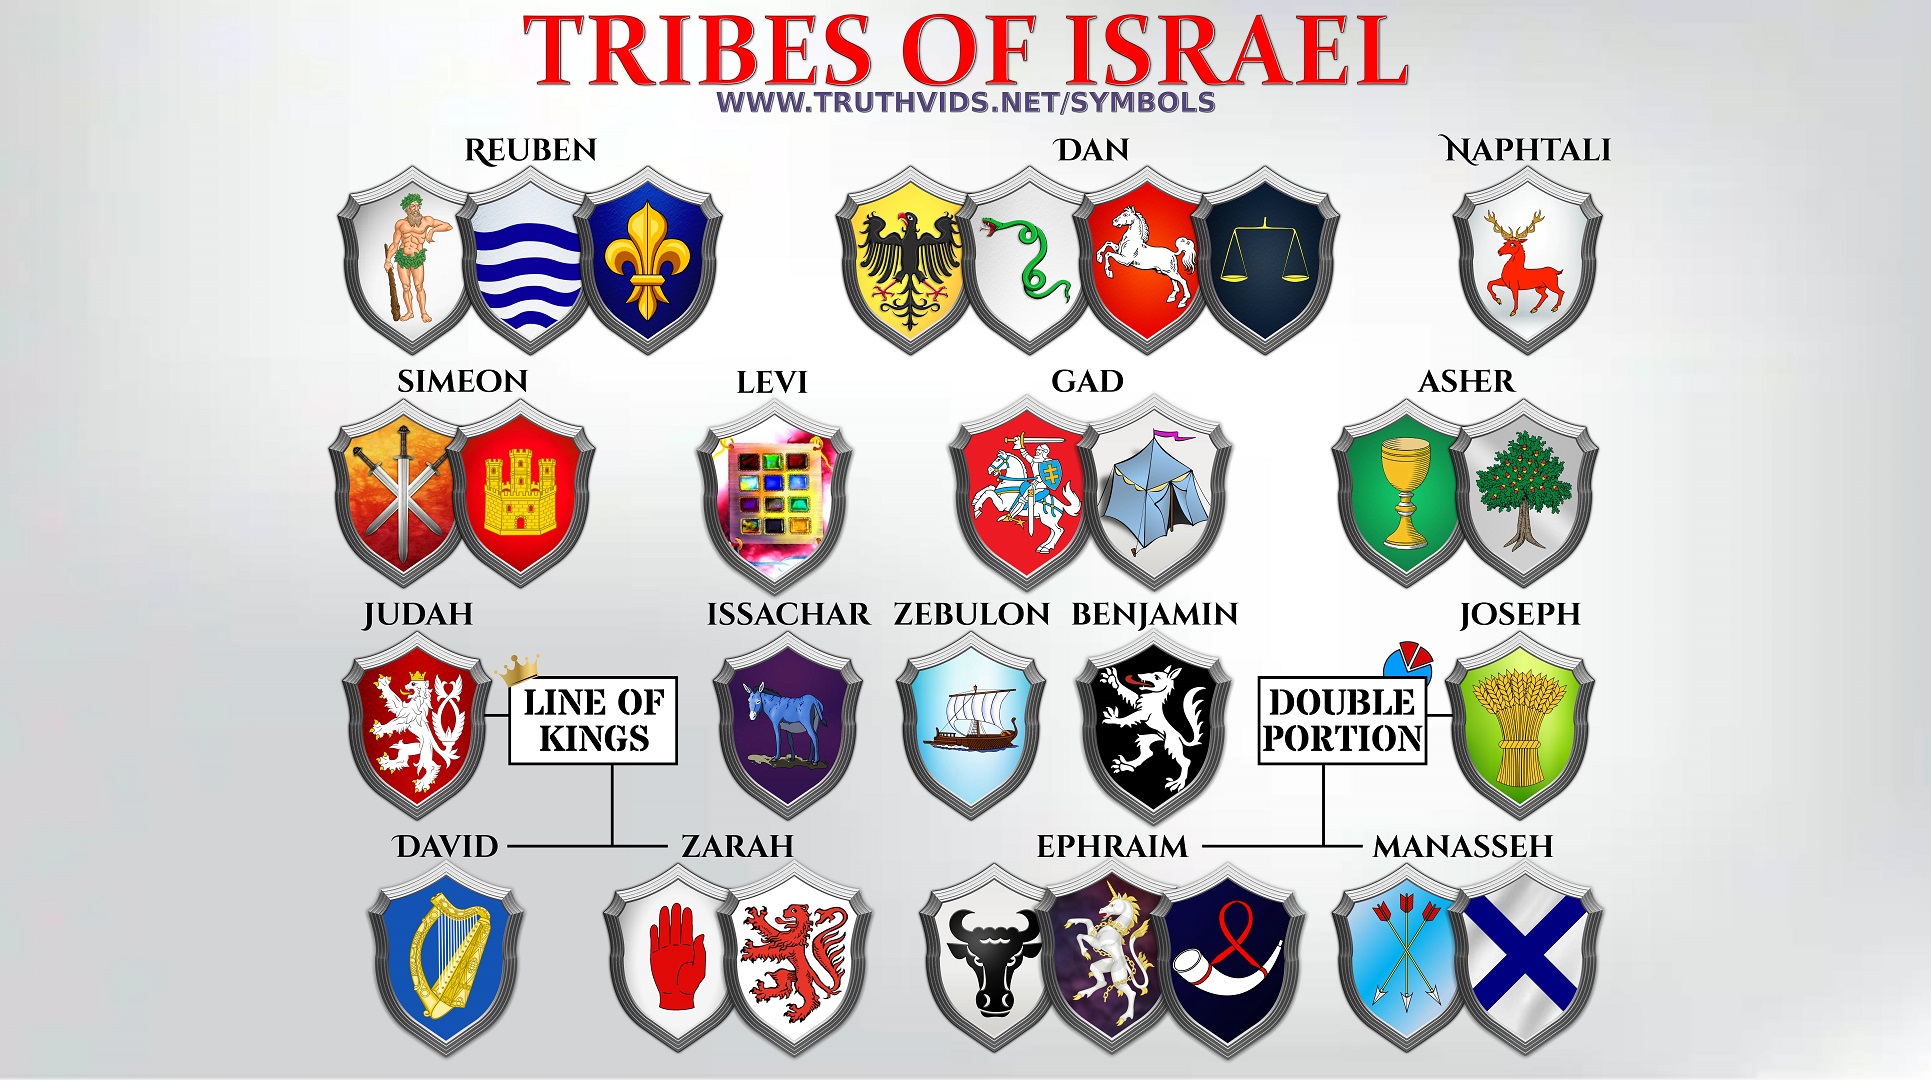 Heraldry and Symbols of the 12 Tribes of Israel - TruthVids.net.